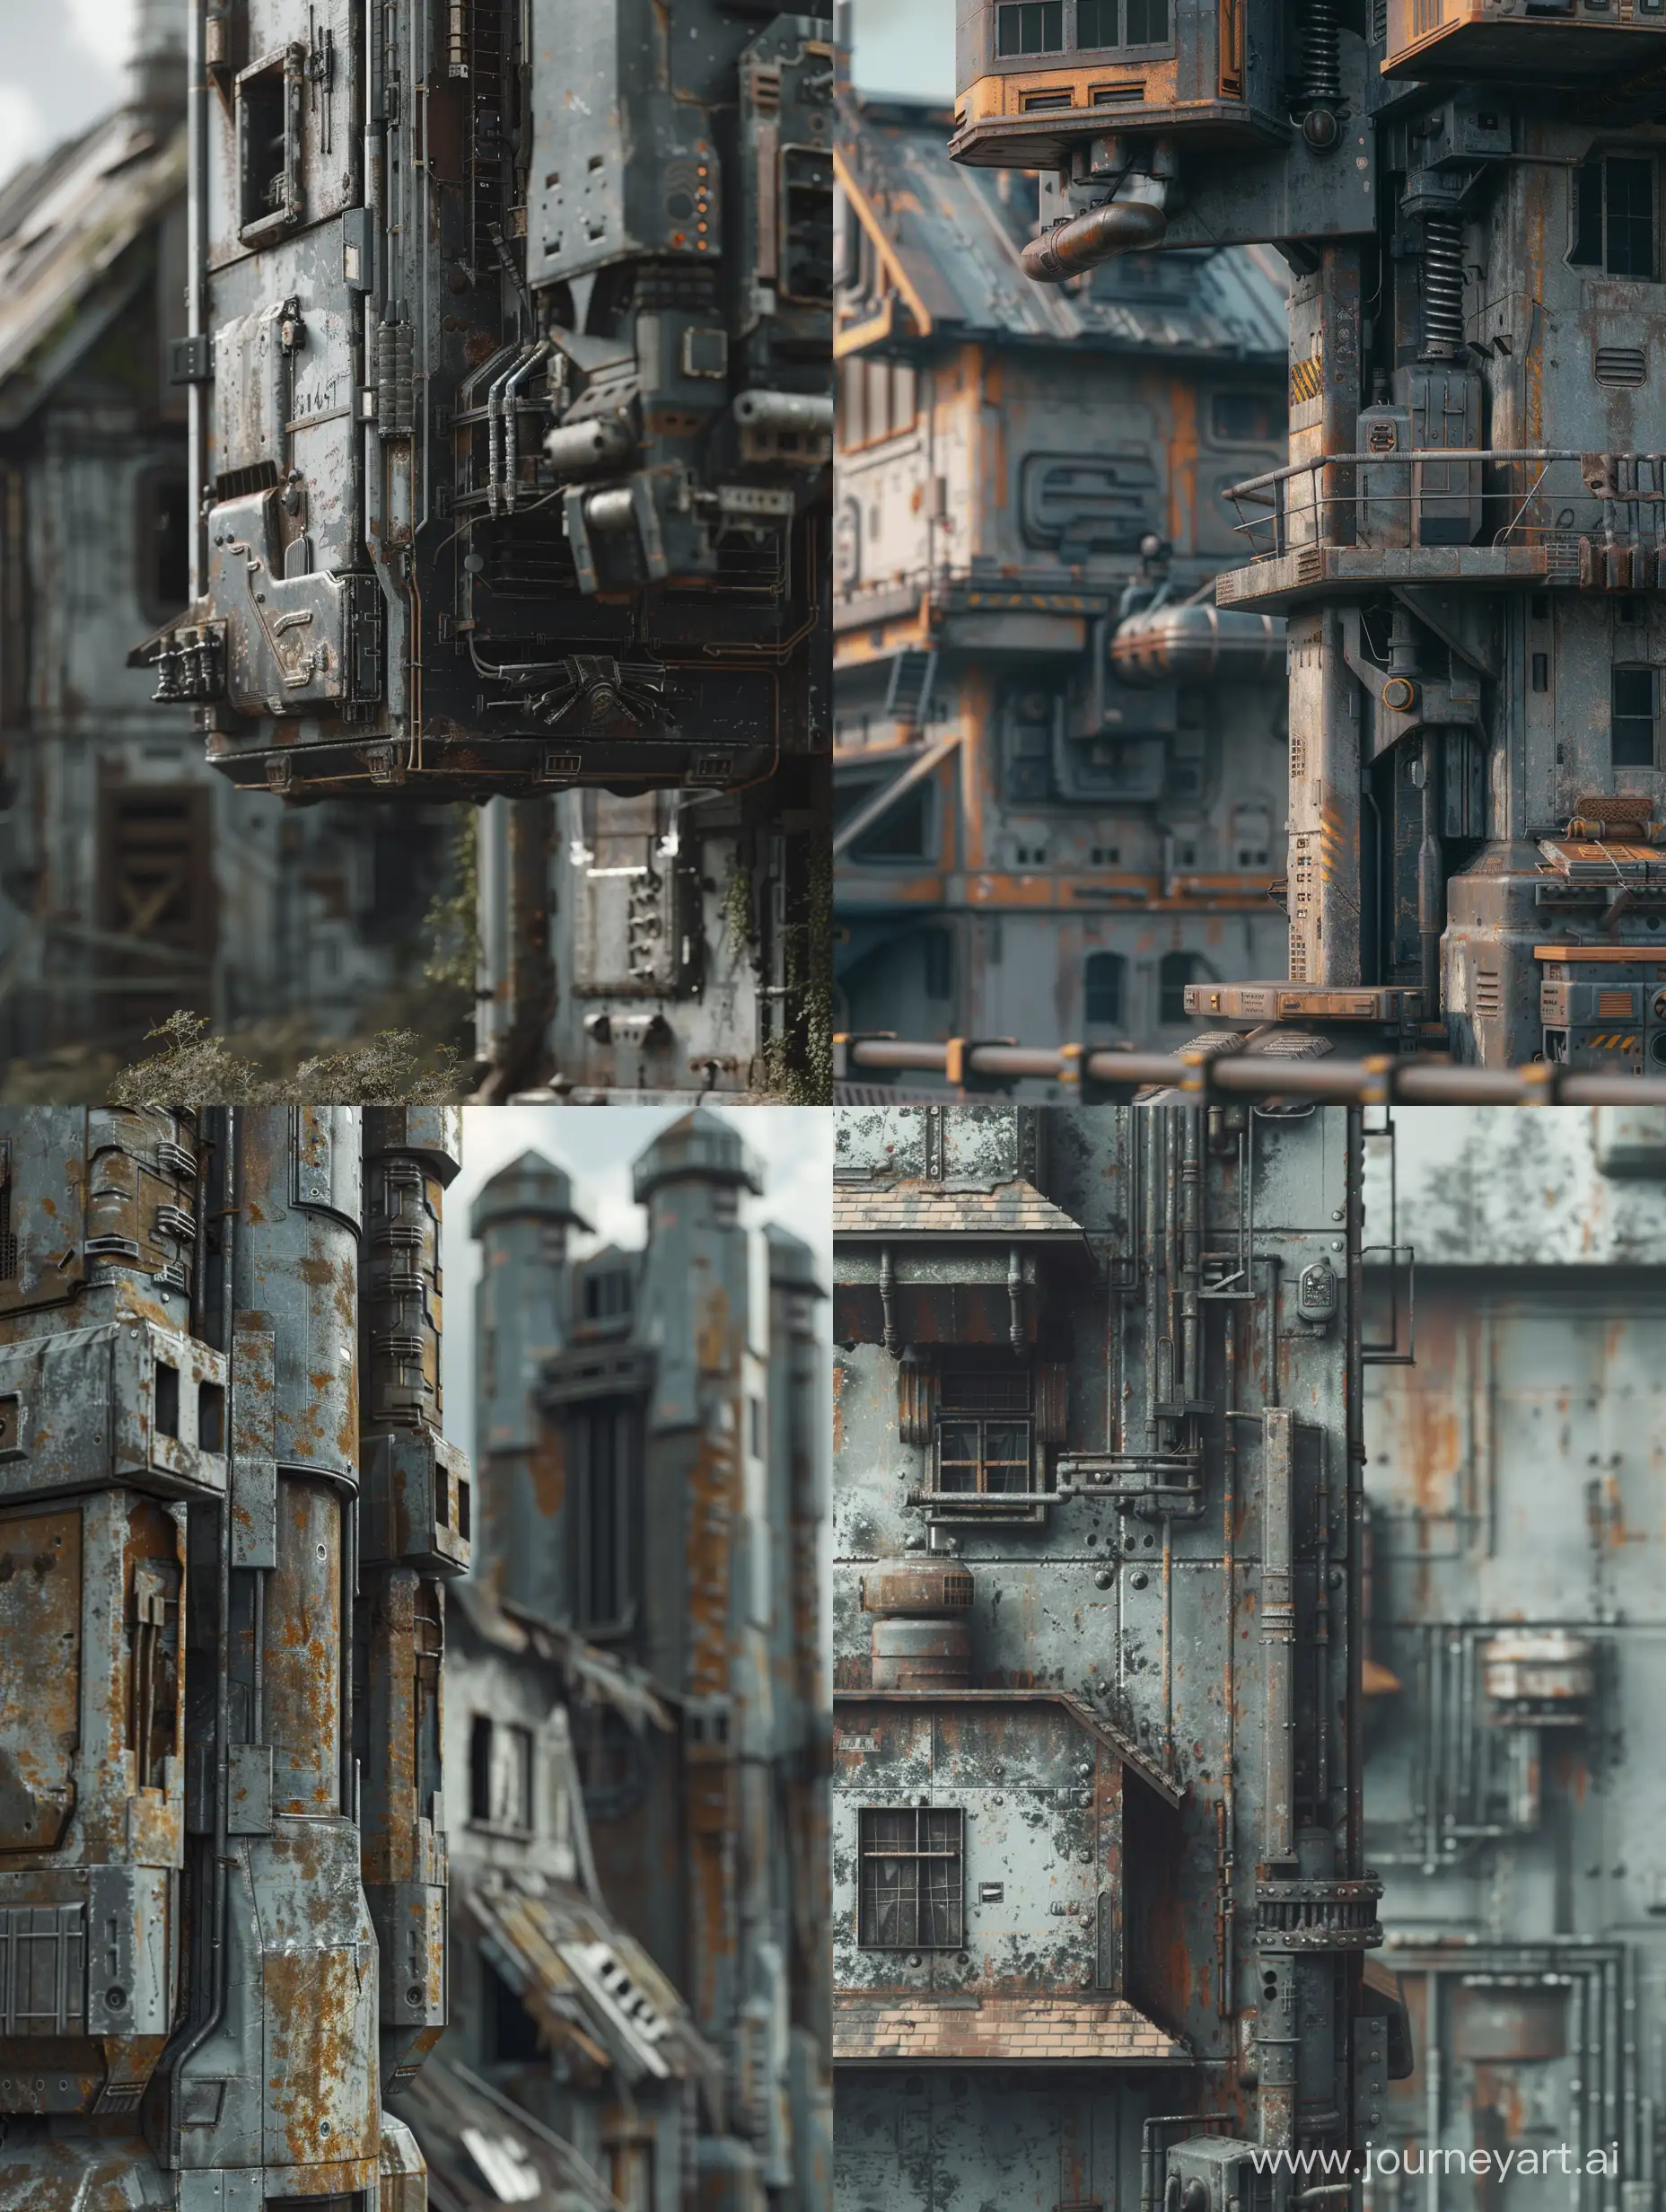 PostApocalyptic-Brutalist-Building-with-Old-Russian-Style-House-and-Cyberpunk-Tower-Details